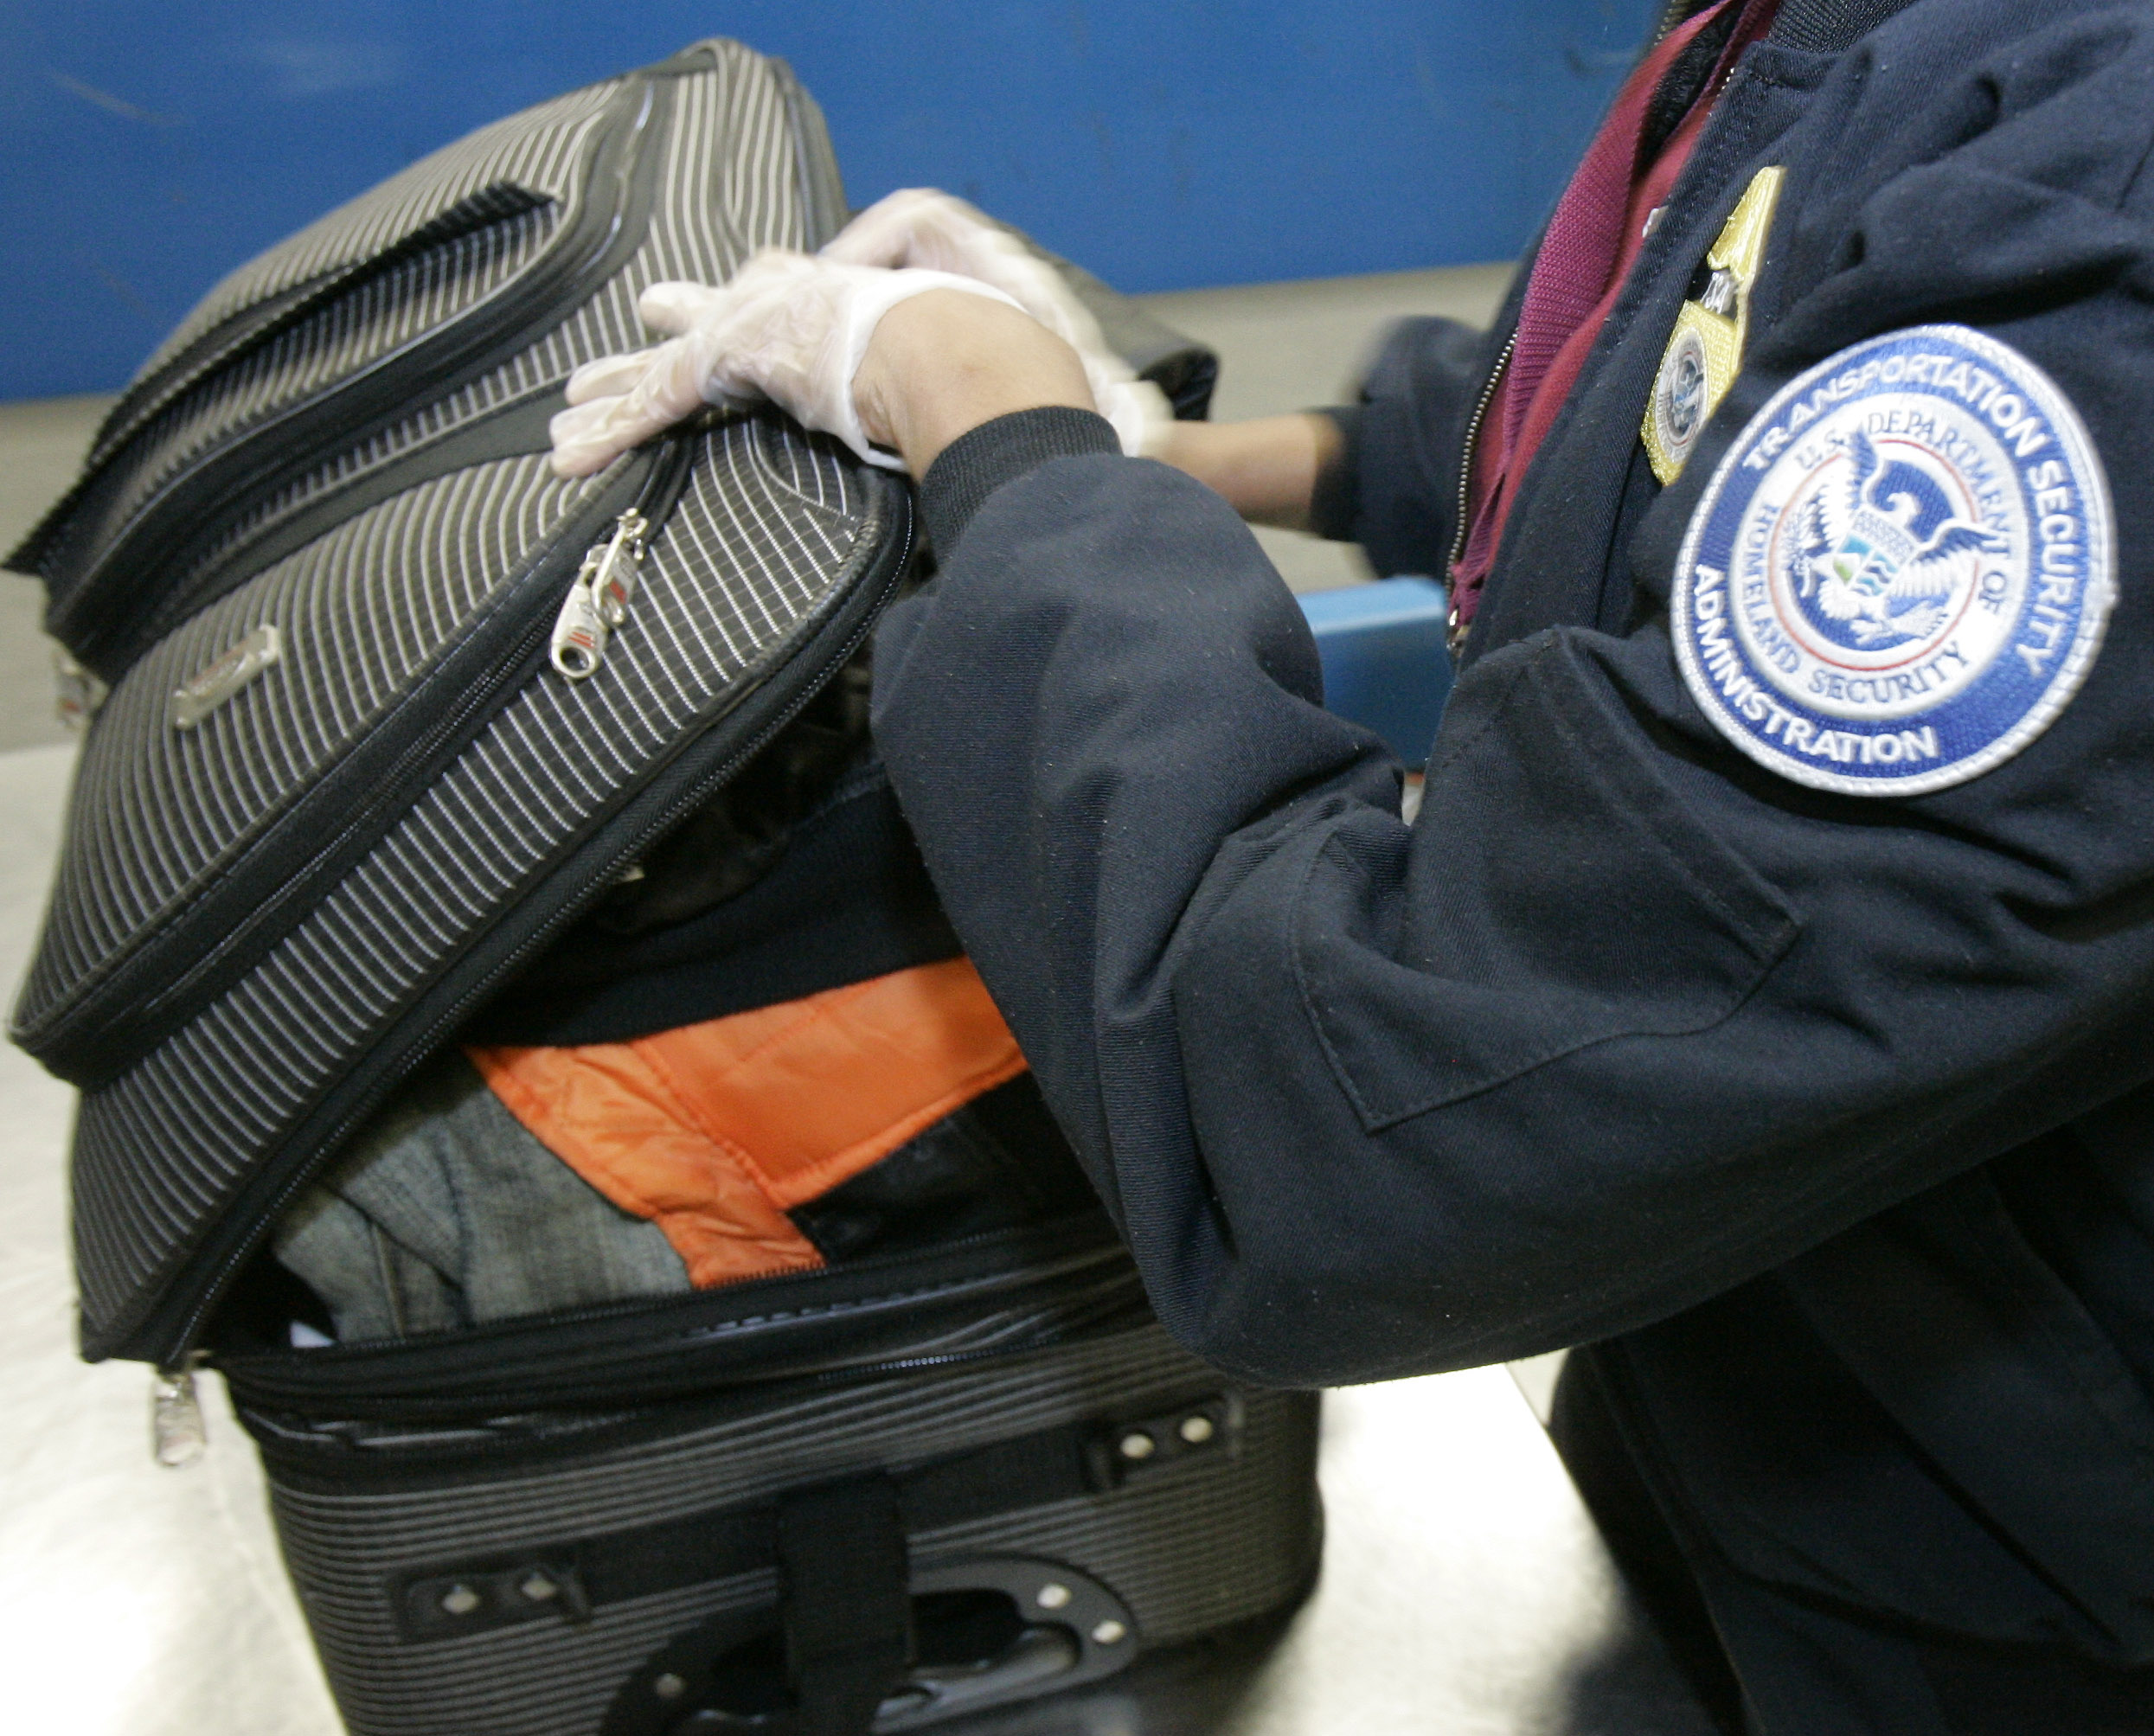 Carry-on or checked baggage? Holiday travel tips from the TSA | WTOP